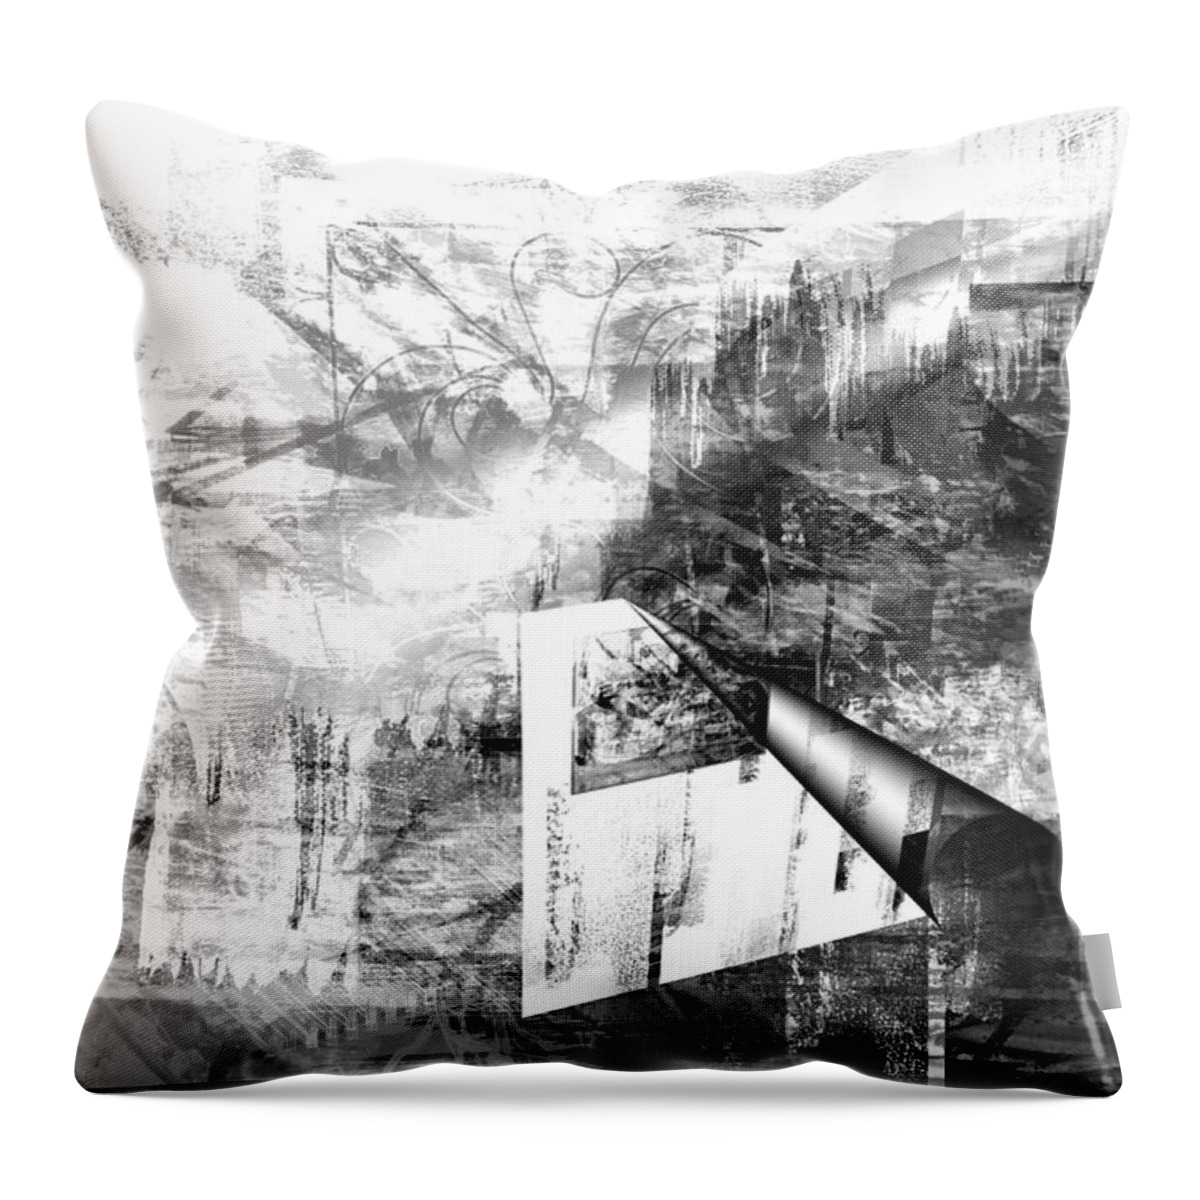 Abstract Throw Pillow featuring the digital art Drawing Ideas by Art Di